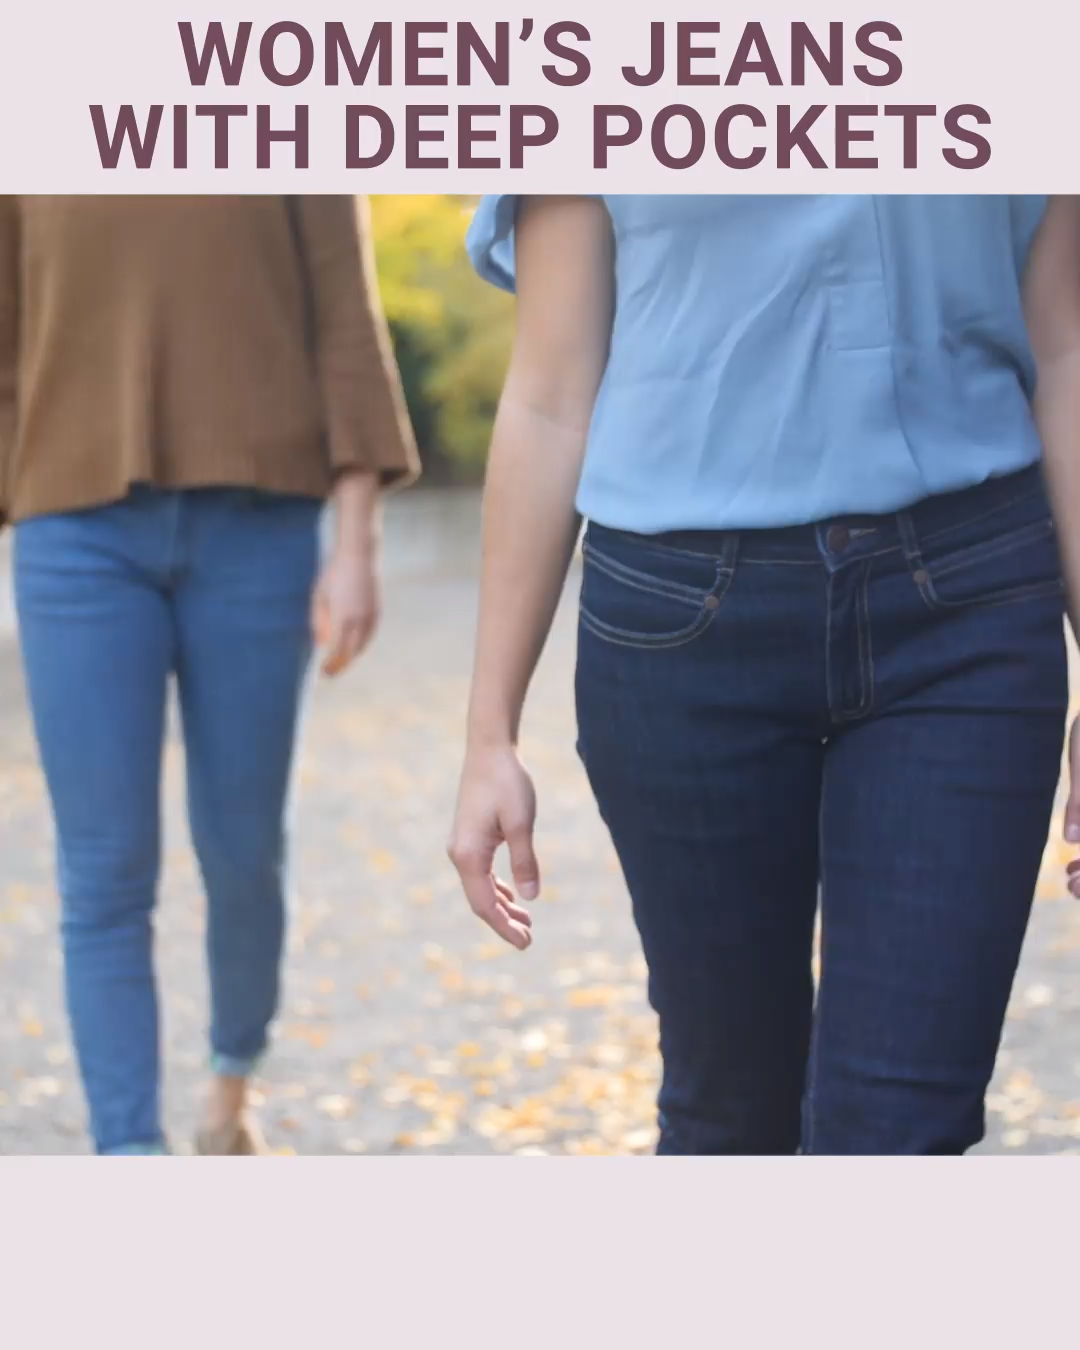 Radian - Comfortable Jeans With Deep Pockets - Radian - Comfortable Jeans With Deep Pockets -   24 style Jeans videos ideas